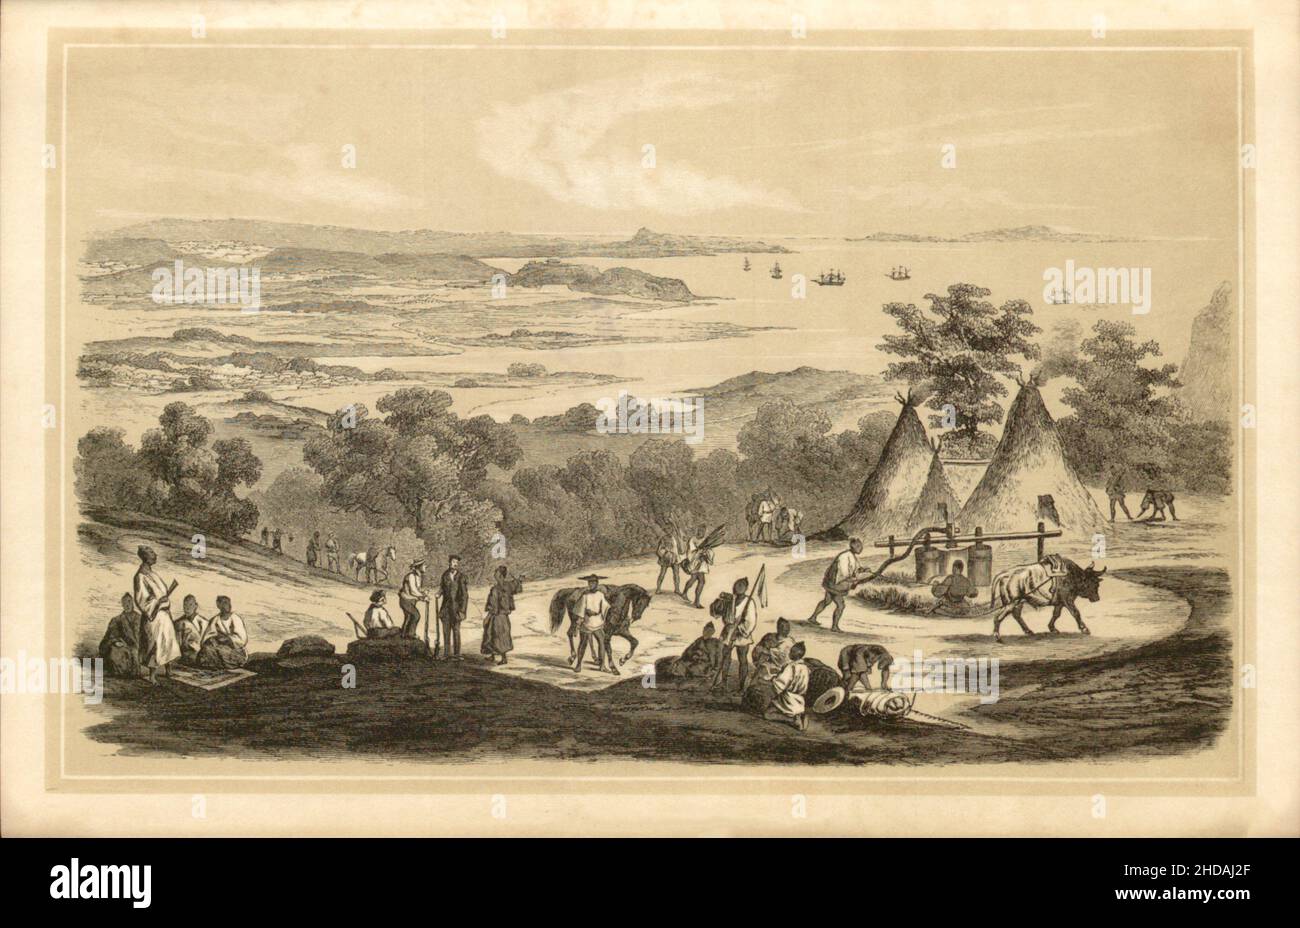 Antique lithograph of 19th century Japan: View from Napa to Ryukyu Islands. 1856 Commodore Perry's Expedition Stock Photo